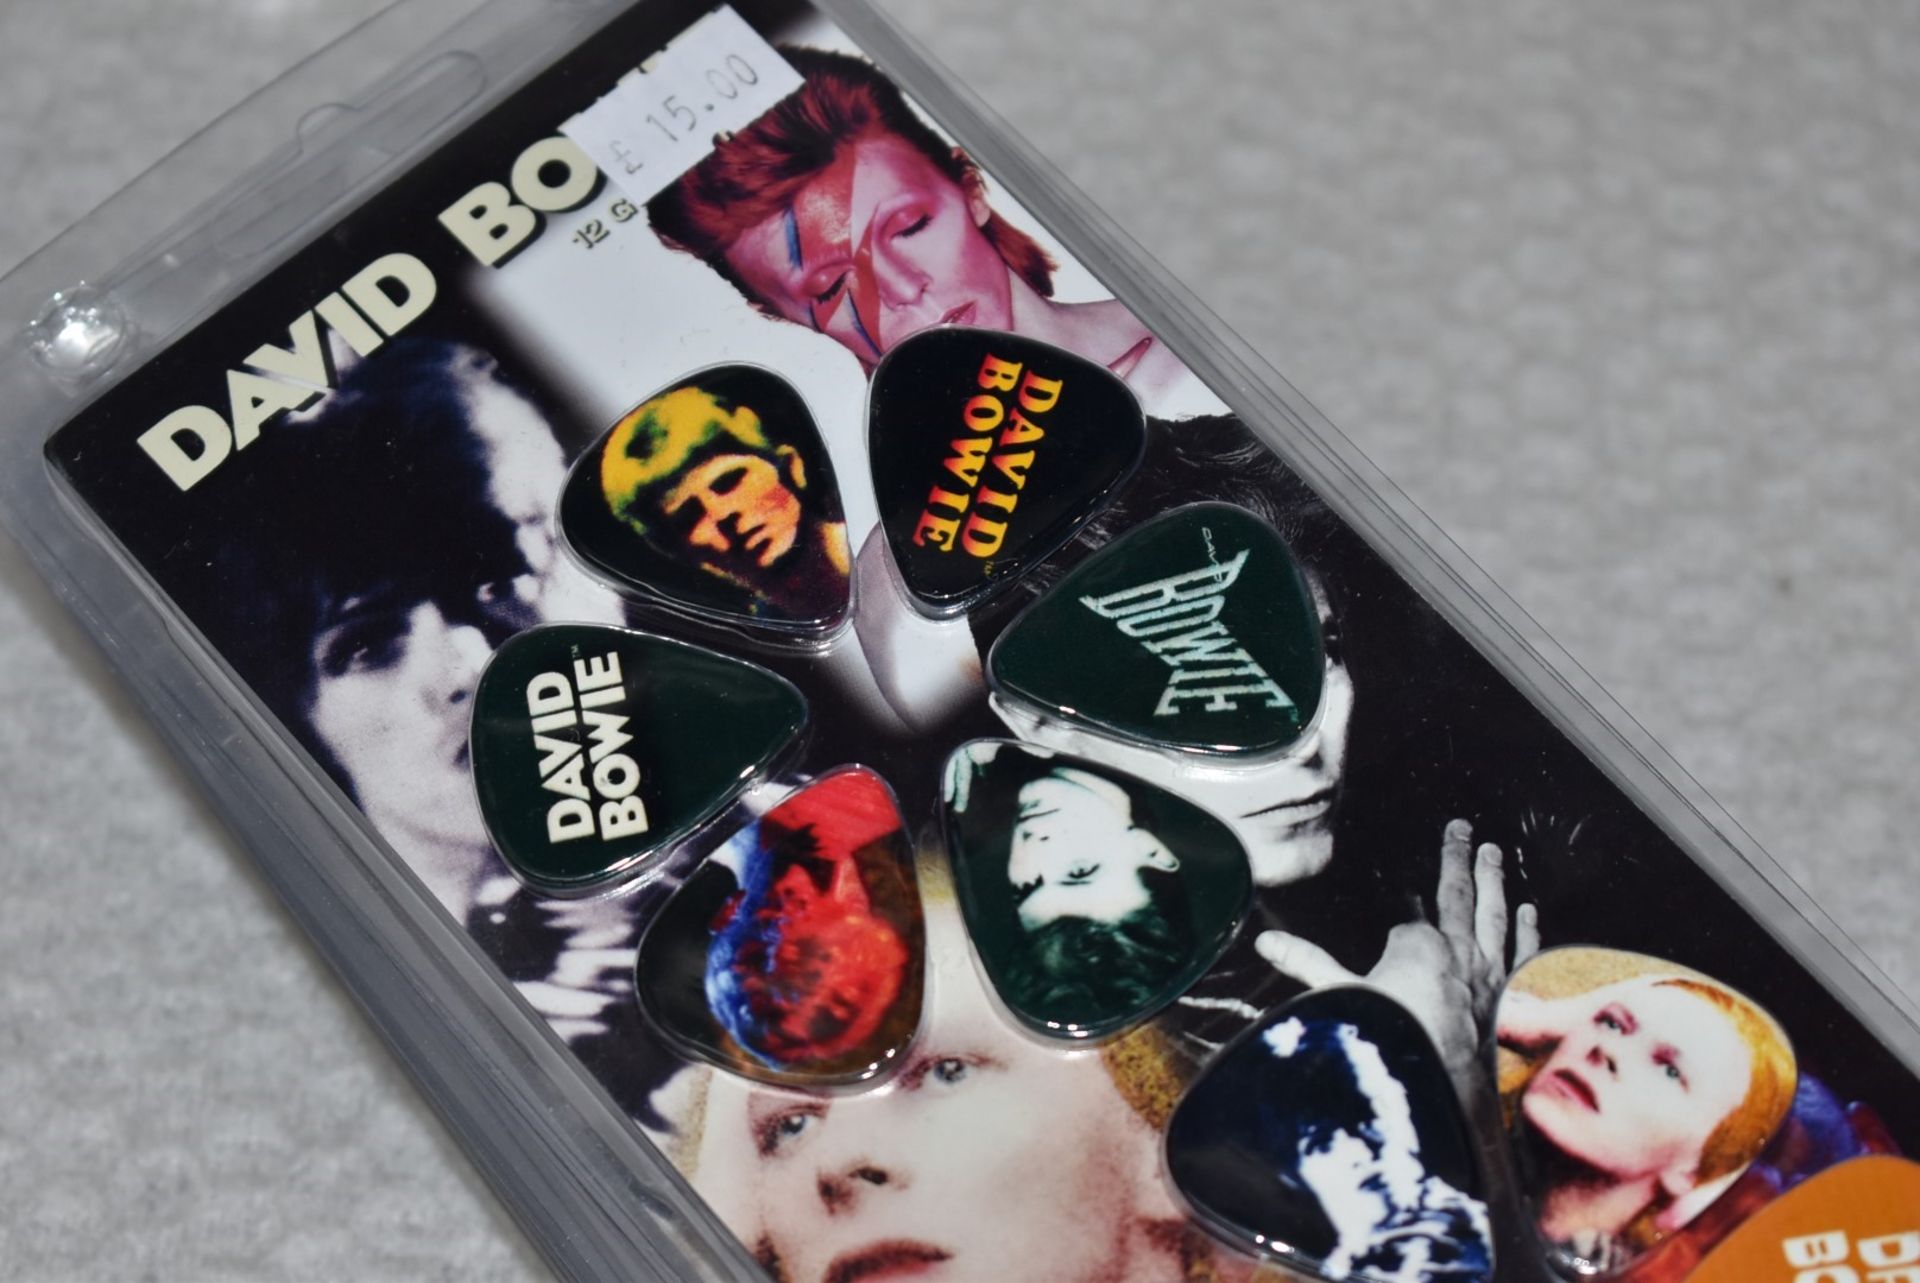 10 x David Bowie Guitar Pick Multipacks By Perri's - 6 Picks Per Pack - Officially Licensed - Image 3 of 7